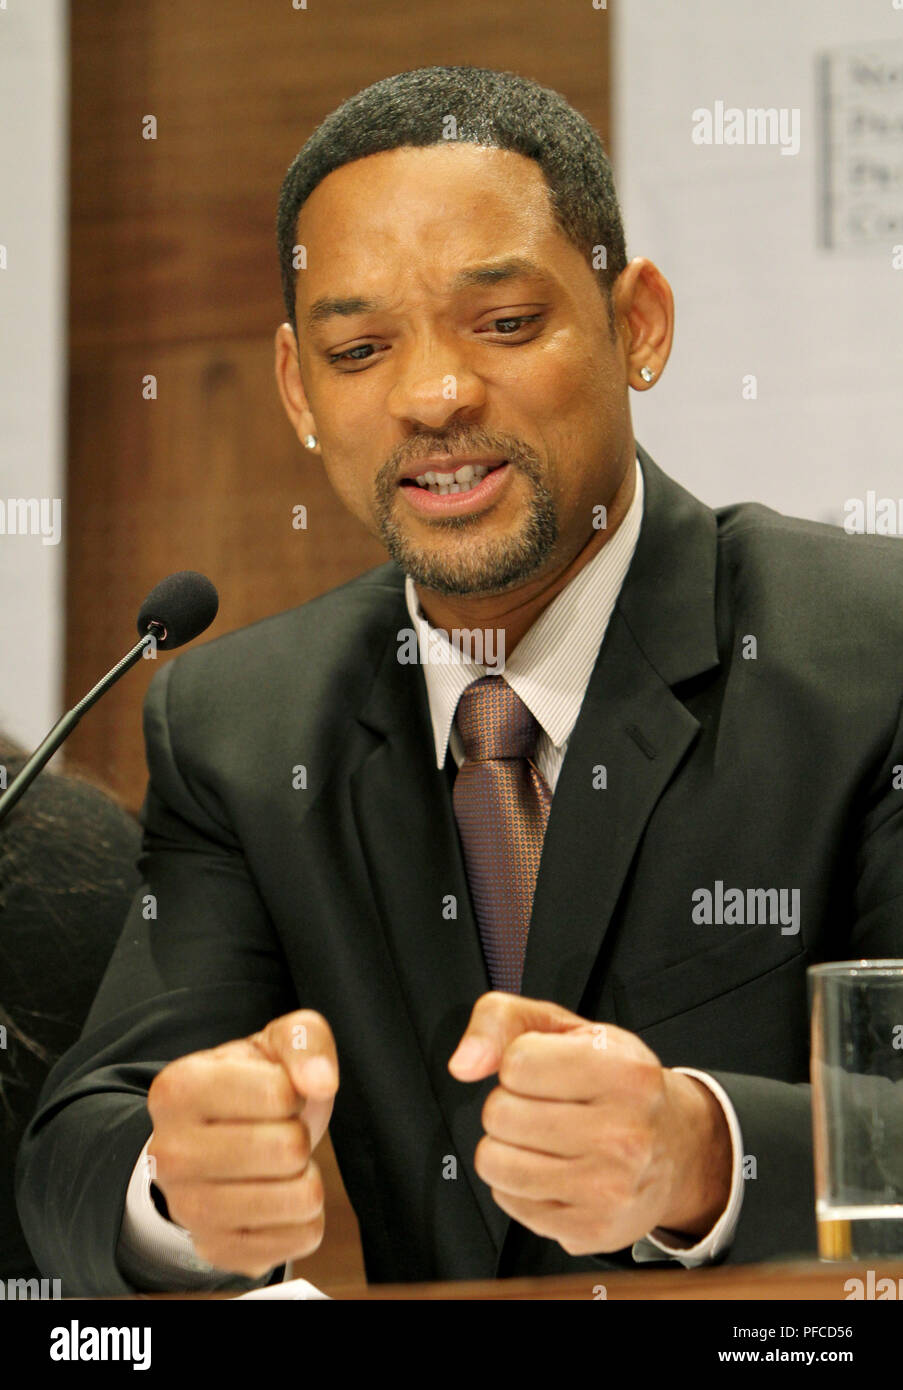 oslo-norway-11th-dec-2009-us-actor-will-smith-gestures-during-a-press-conference-prior-the-nobel-peace-prize-concert-in-oslo-norway-11-december-2009-smith-will-host-the-concert-in-honour-of-nobel-peace-prize-2009-laureate-us-president-obama-credit-patrick-van-katwijk-dpaalamy-live-news-PFCD56.jpg